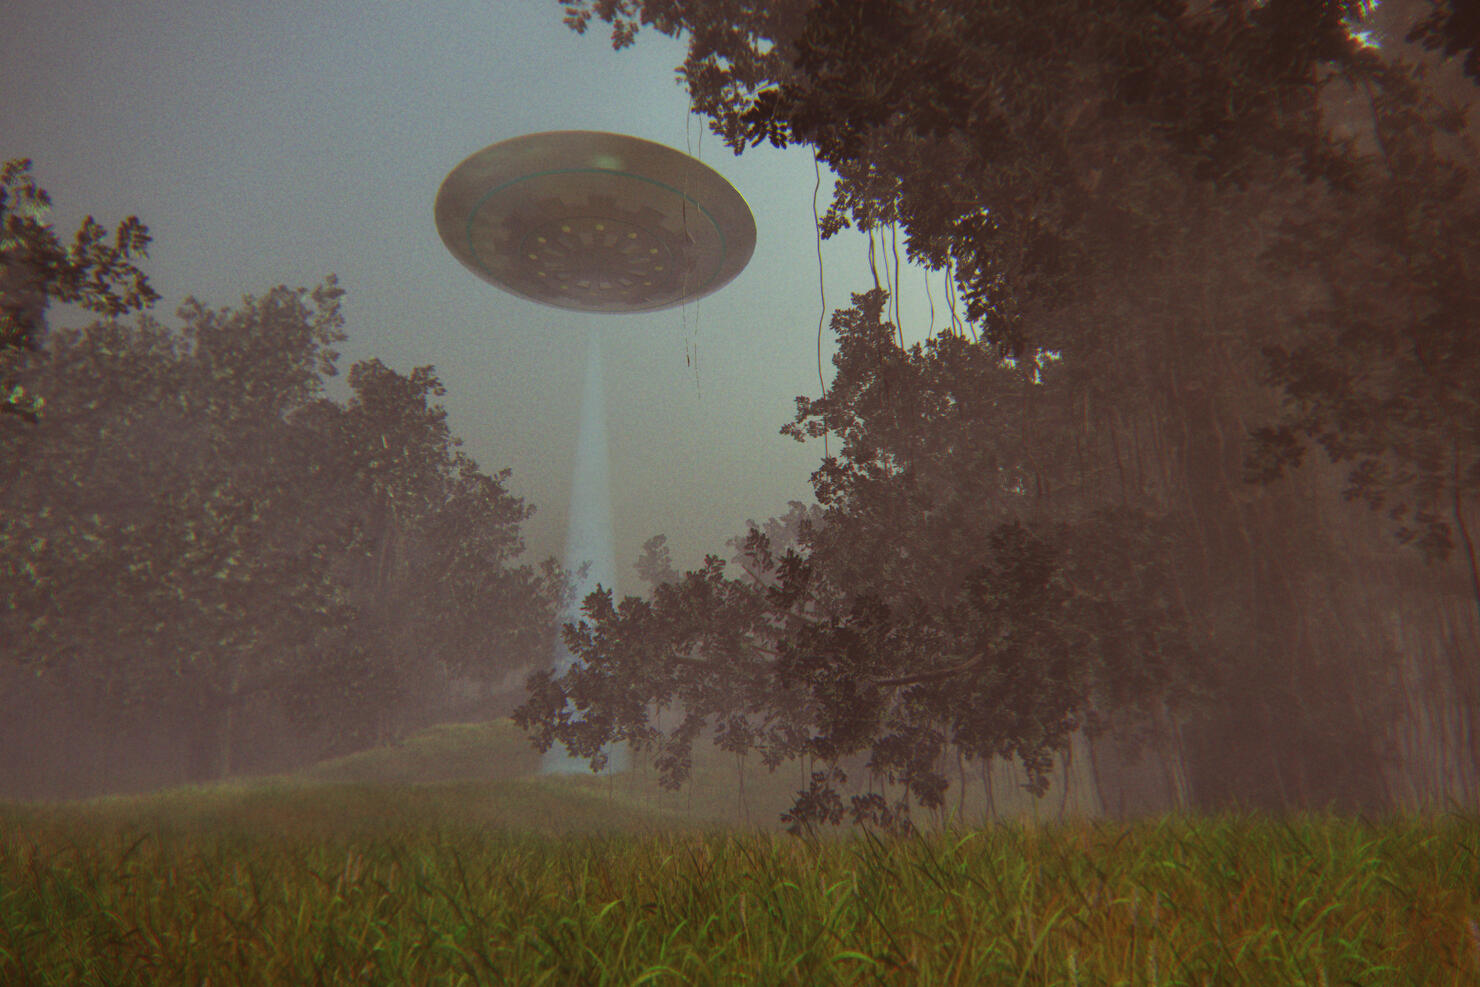 UFO flying over forest at night